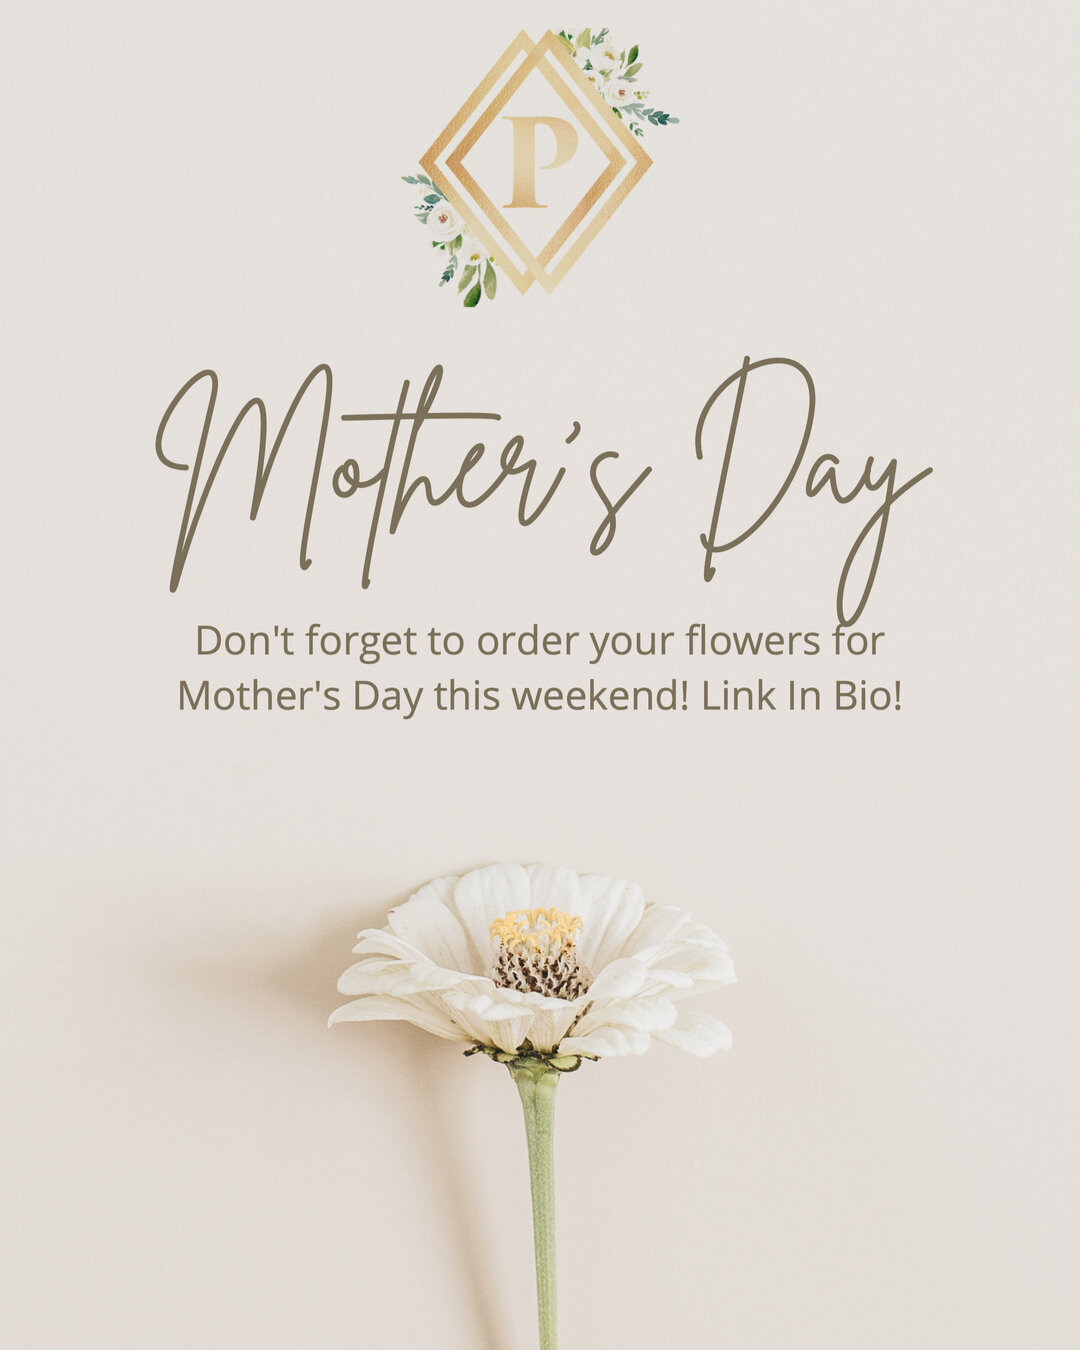 Mother's Day is this Sunday!  Have you ordered your flowers yet?  Stop by the shop and choose from fresh hand tied bouquets and gorgeous arrangements!  Or order online for local delivery or pick up!  Link in Bio! ⠀⠀⠀⠀⠀⠀⠀⠀⠀
#studioprive #blooooms #flo